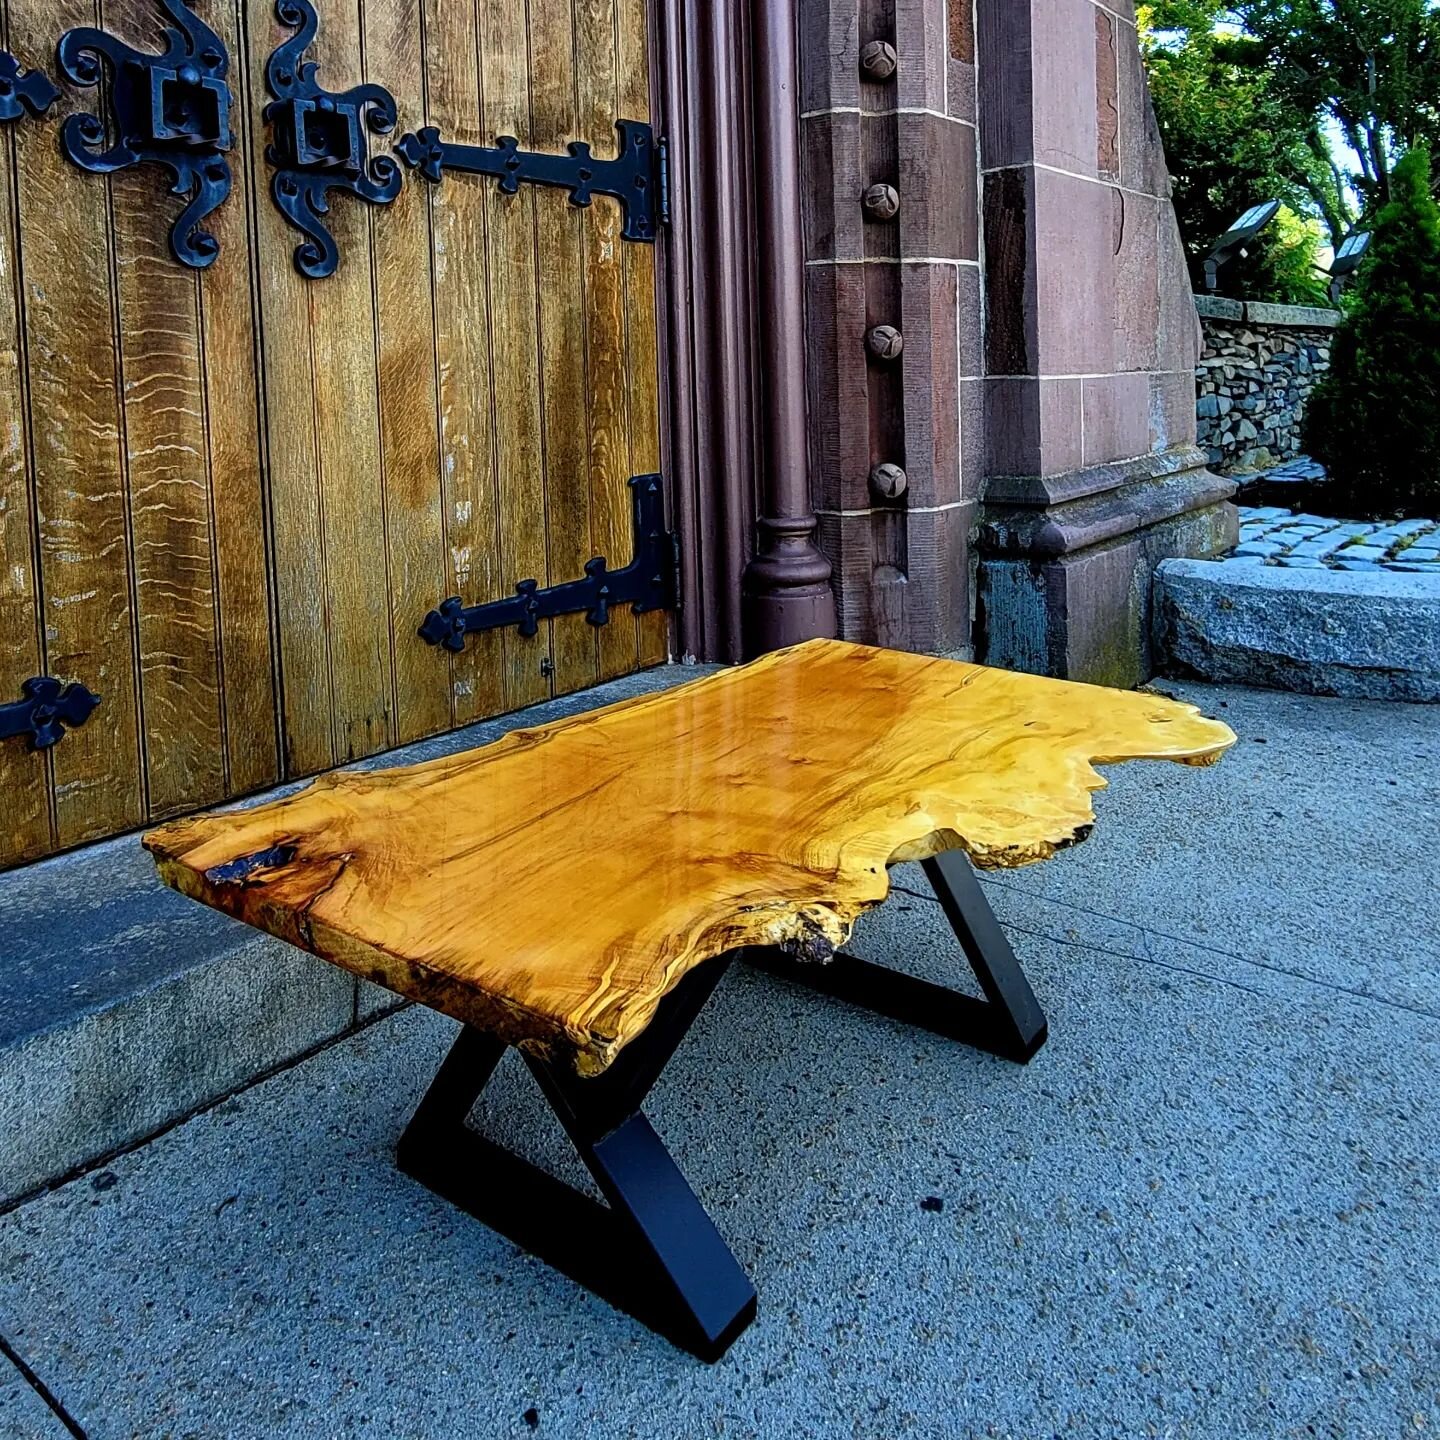 Burl Maple Coffee Table on its way to new clients in Golden, CO. This sugar maple tree came from Stanwich Road which divides Stamford and Greenwich Connecticut. The land remained unclaimed by both townships because the terrain was virtually impassabl